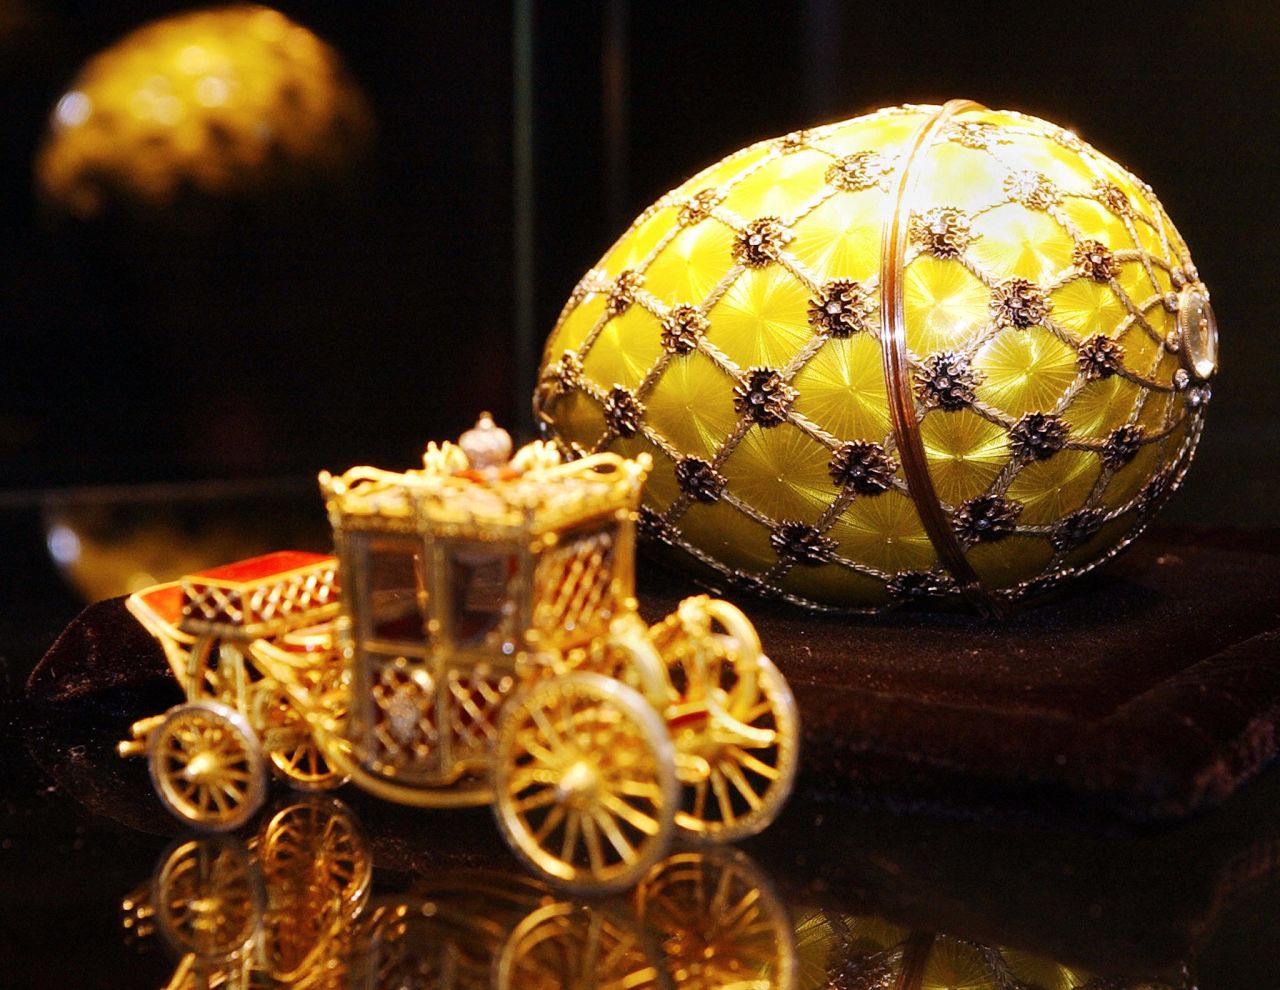 The Faberge Coronation Egg on display at Sotheby's auction houses in New York in 2004.